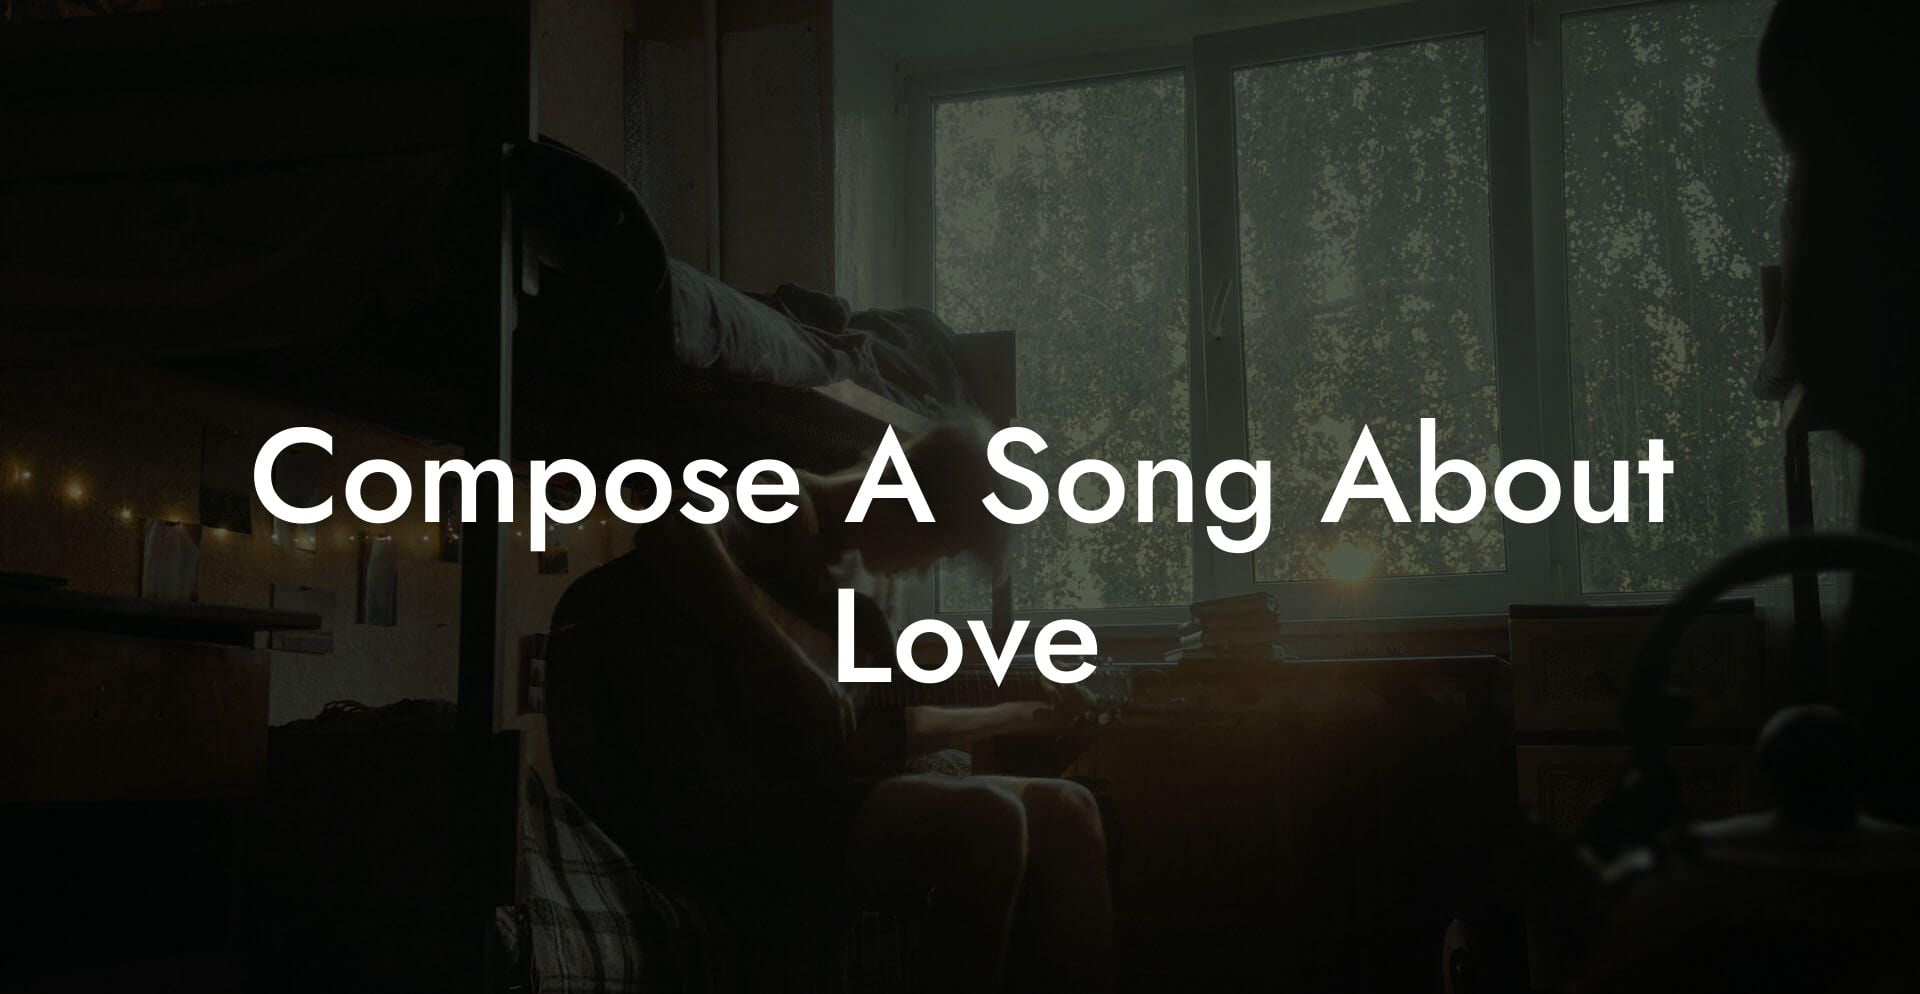 compose a song about love lyric assistant